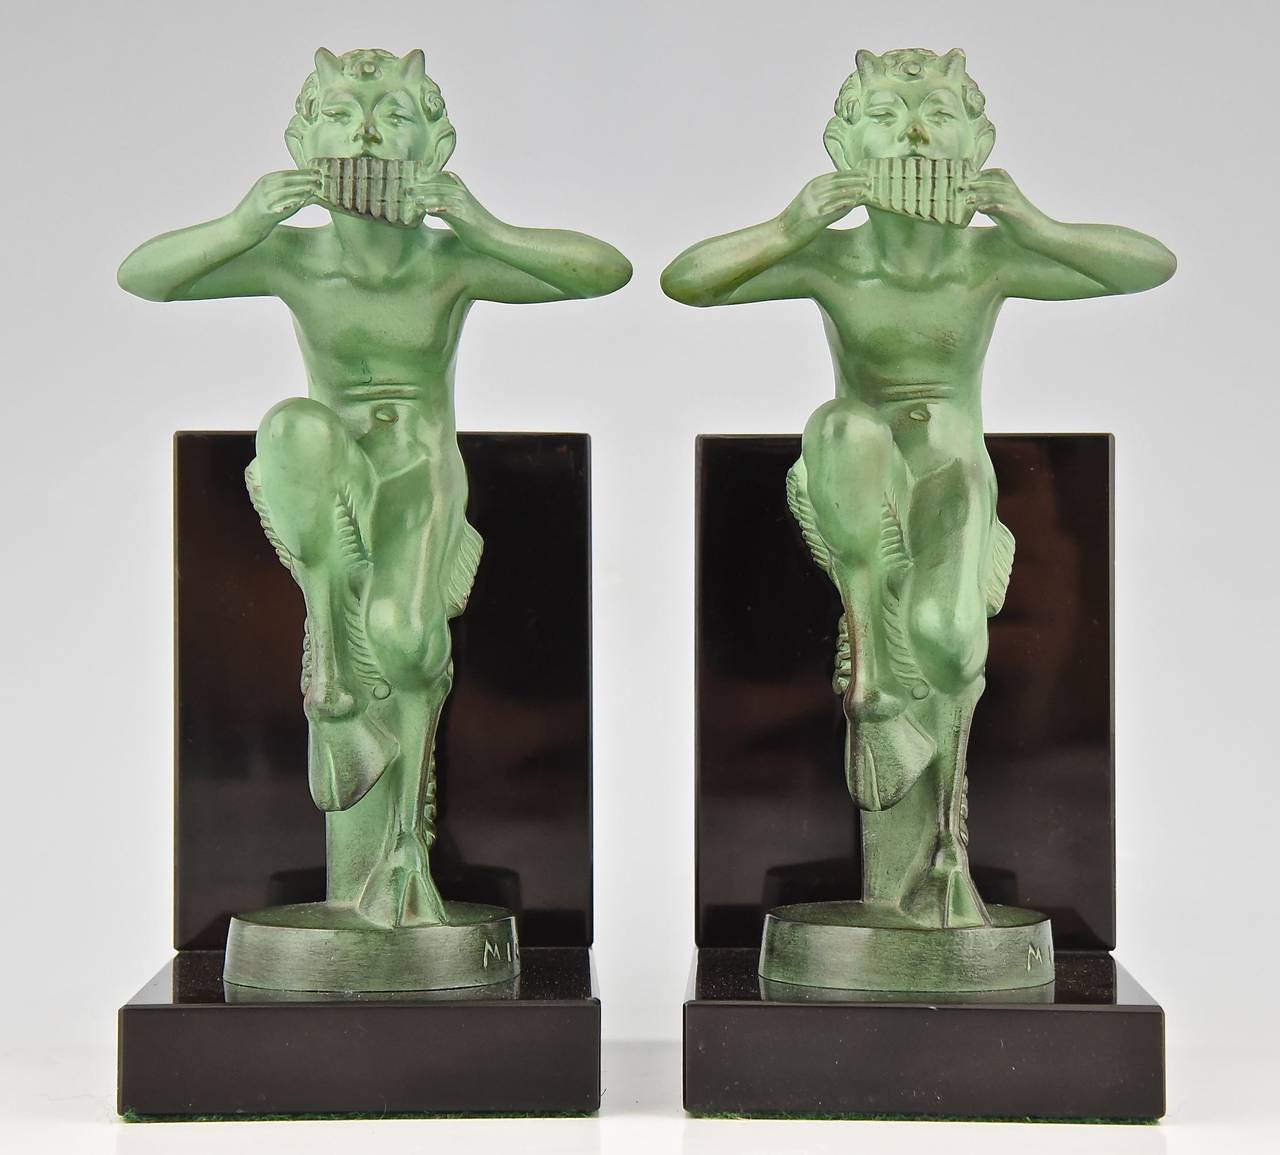 A pair of Art Deco satyr bookends signed Mic.
Cast by the Max Le Verrier foundry.
Style: Art Deco. 
Date: 1925-1930.

Material:  Green patinated metal. Black marble base. 
Origin:  France. 

Size of one:  
H 7.3 inch x L 3.9 inch x W 3.1